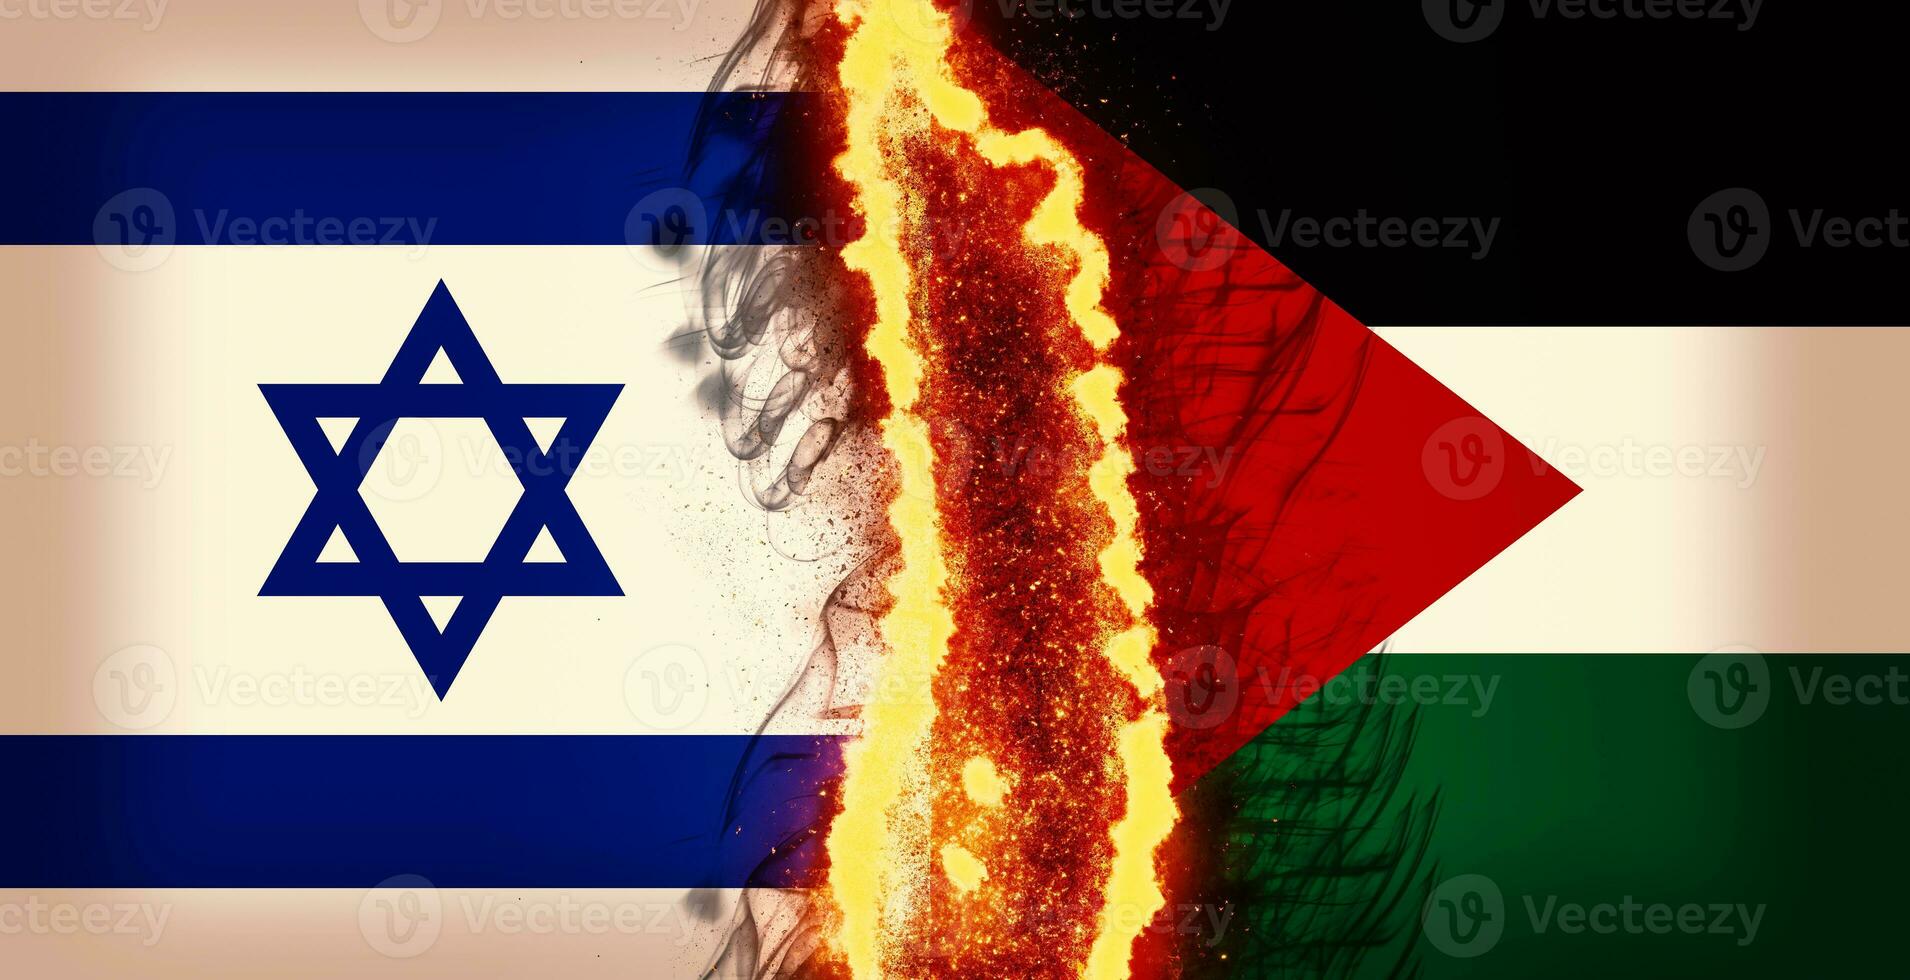 Israel vs Palestine flags divided by fire and smoke - digital composite photo